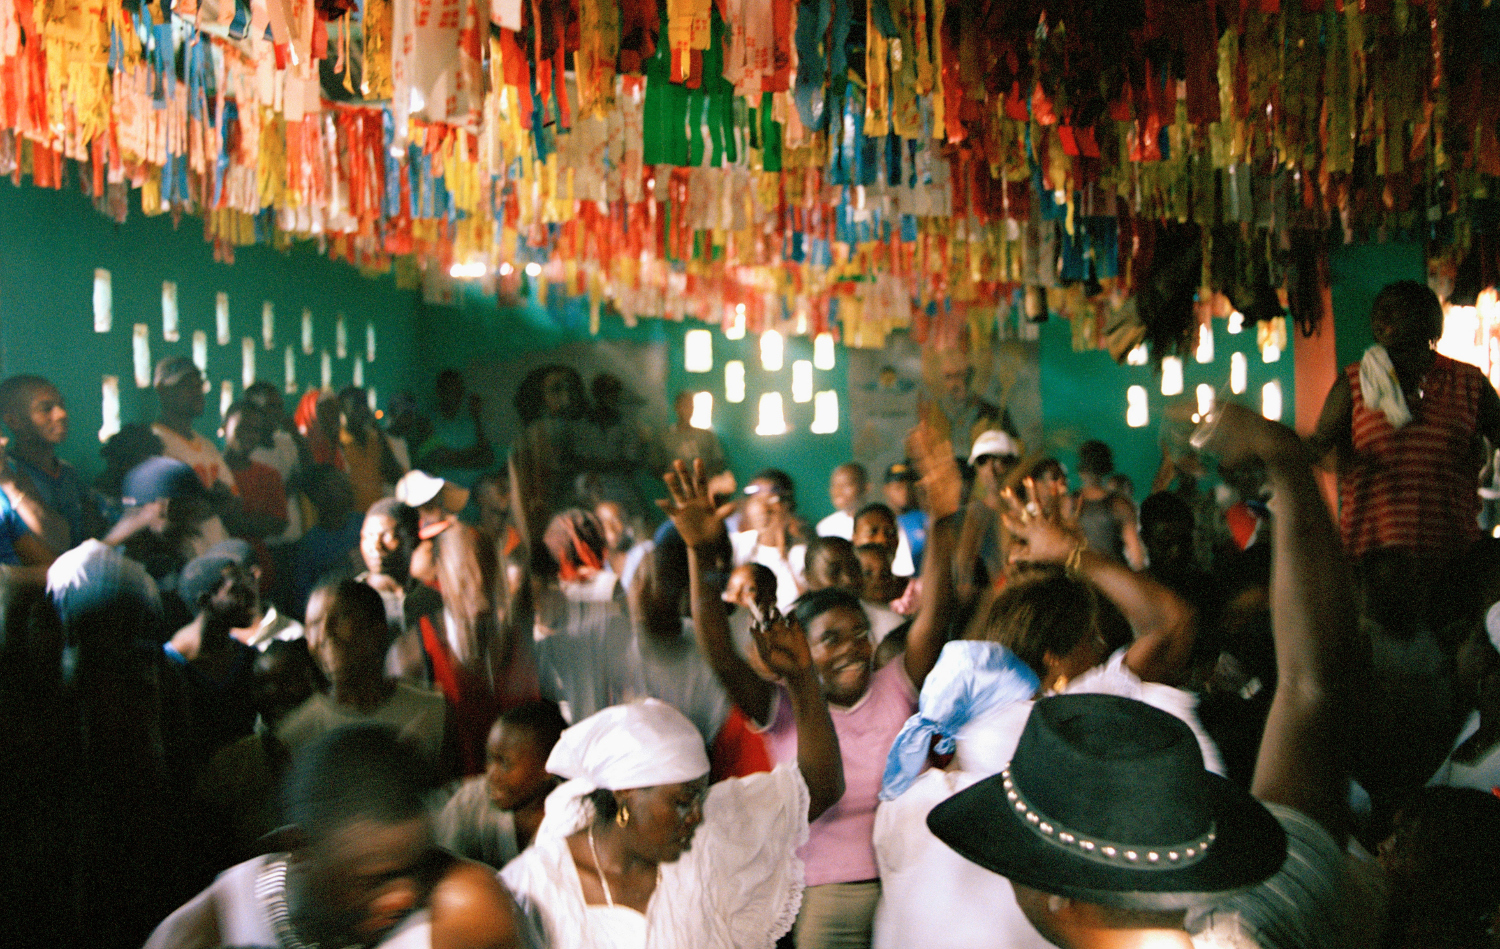 Worshippers at a vodou ceremony in Port-au-Prince, Haiti